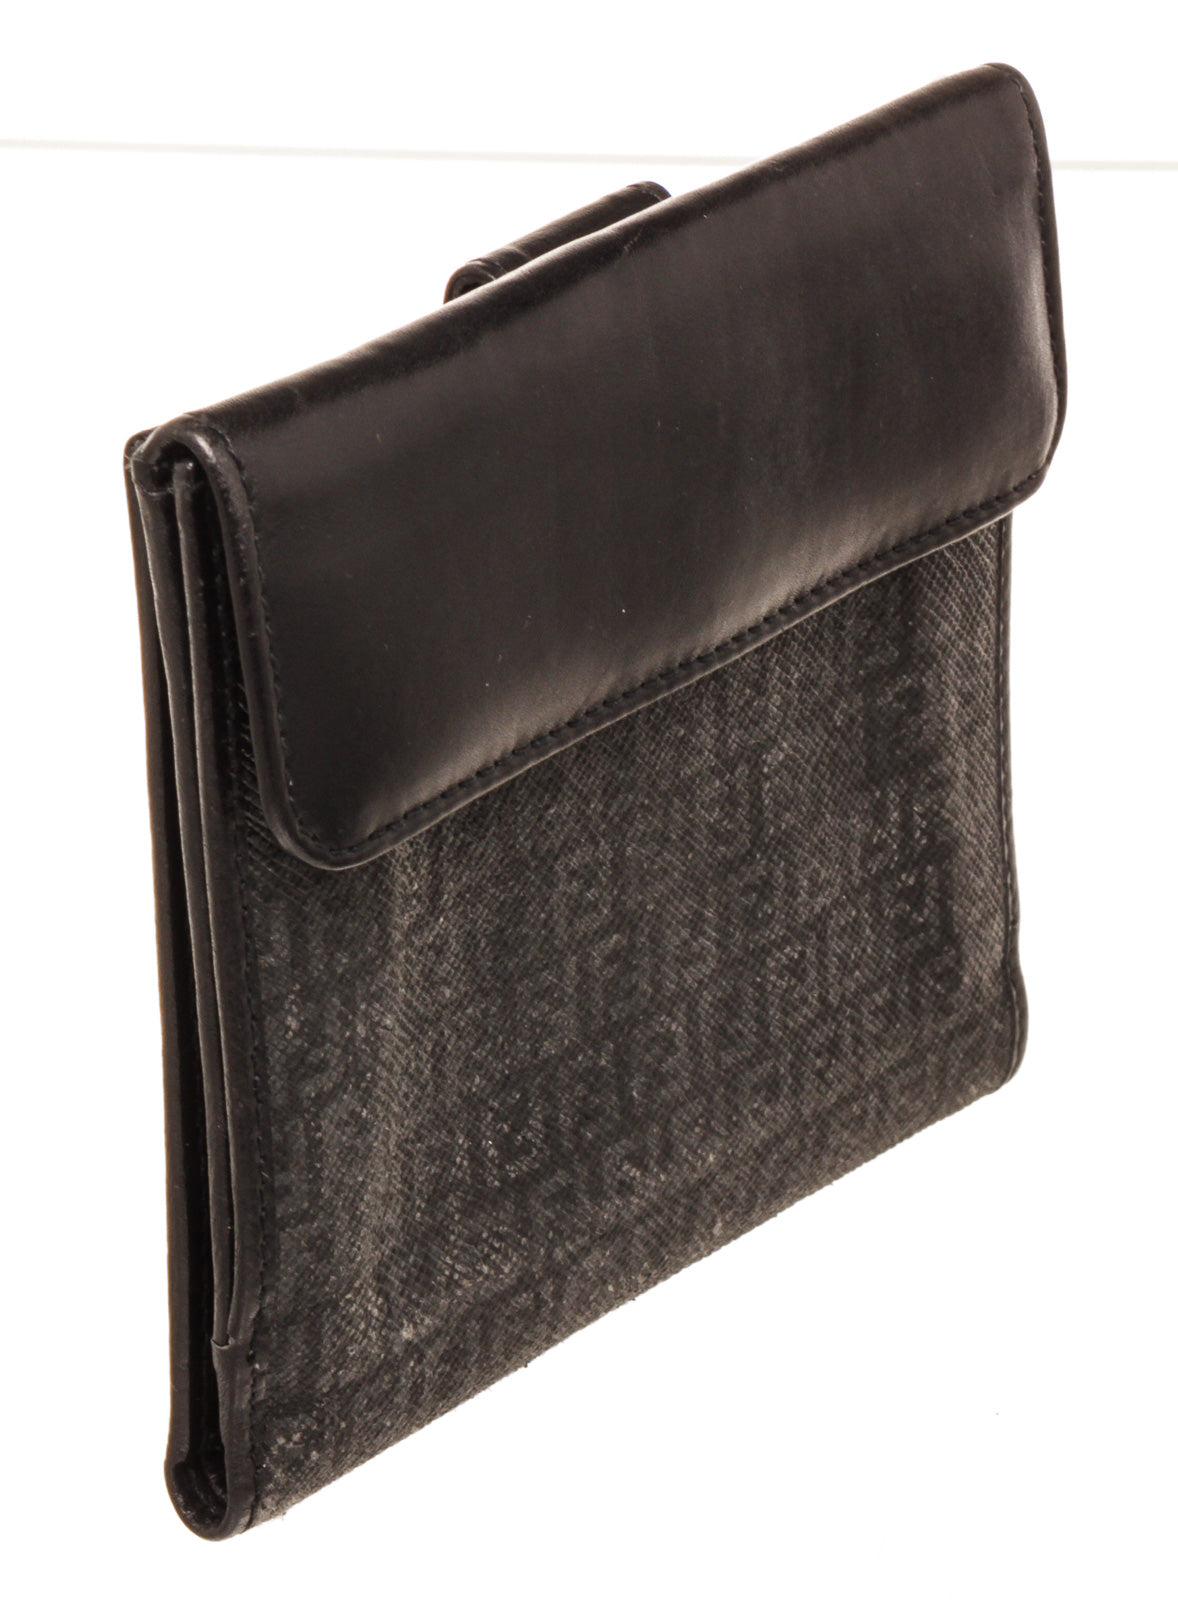 Fendi Black Canvas Compact Tab Wallet with canvas gold-tone hardware, interior card holder pockets and snap closure.
45437MSC